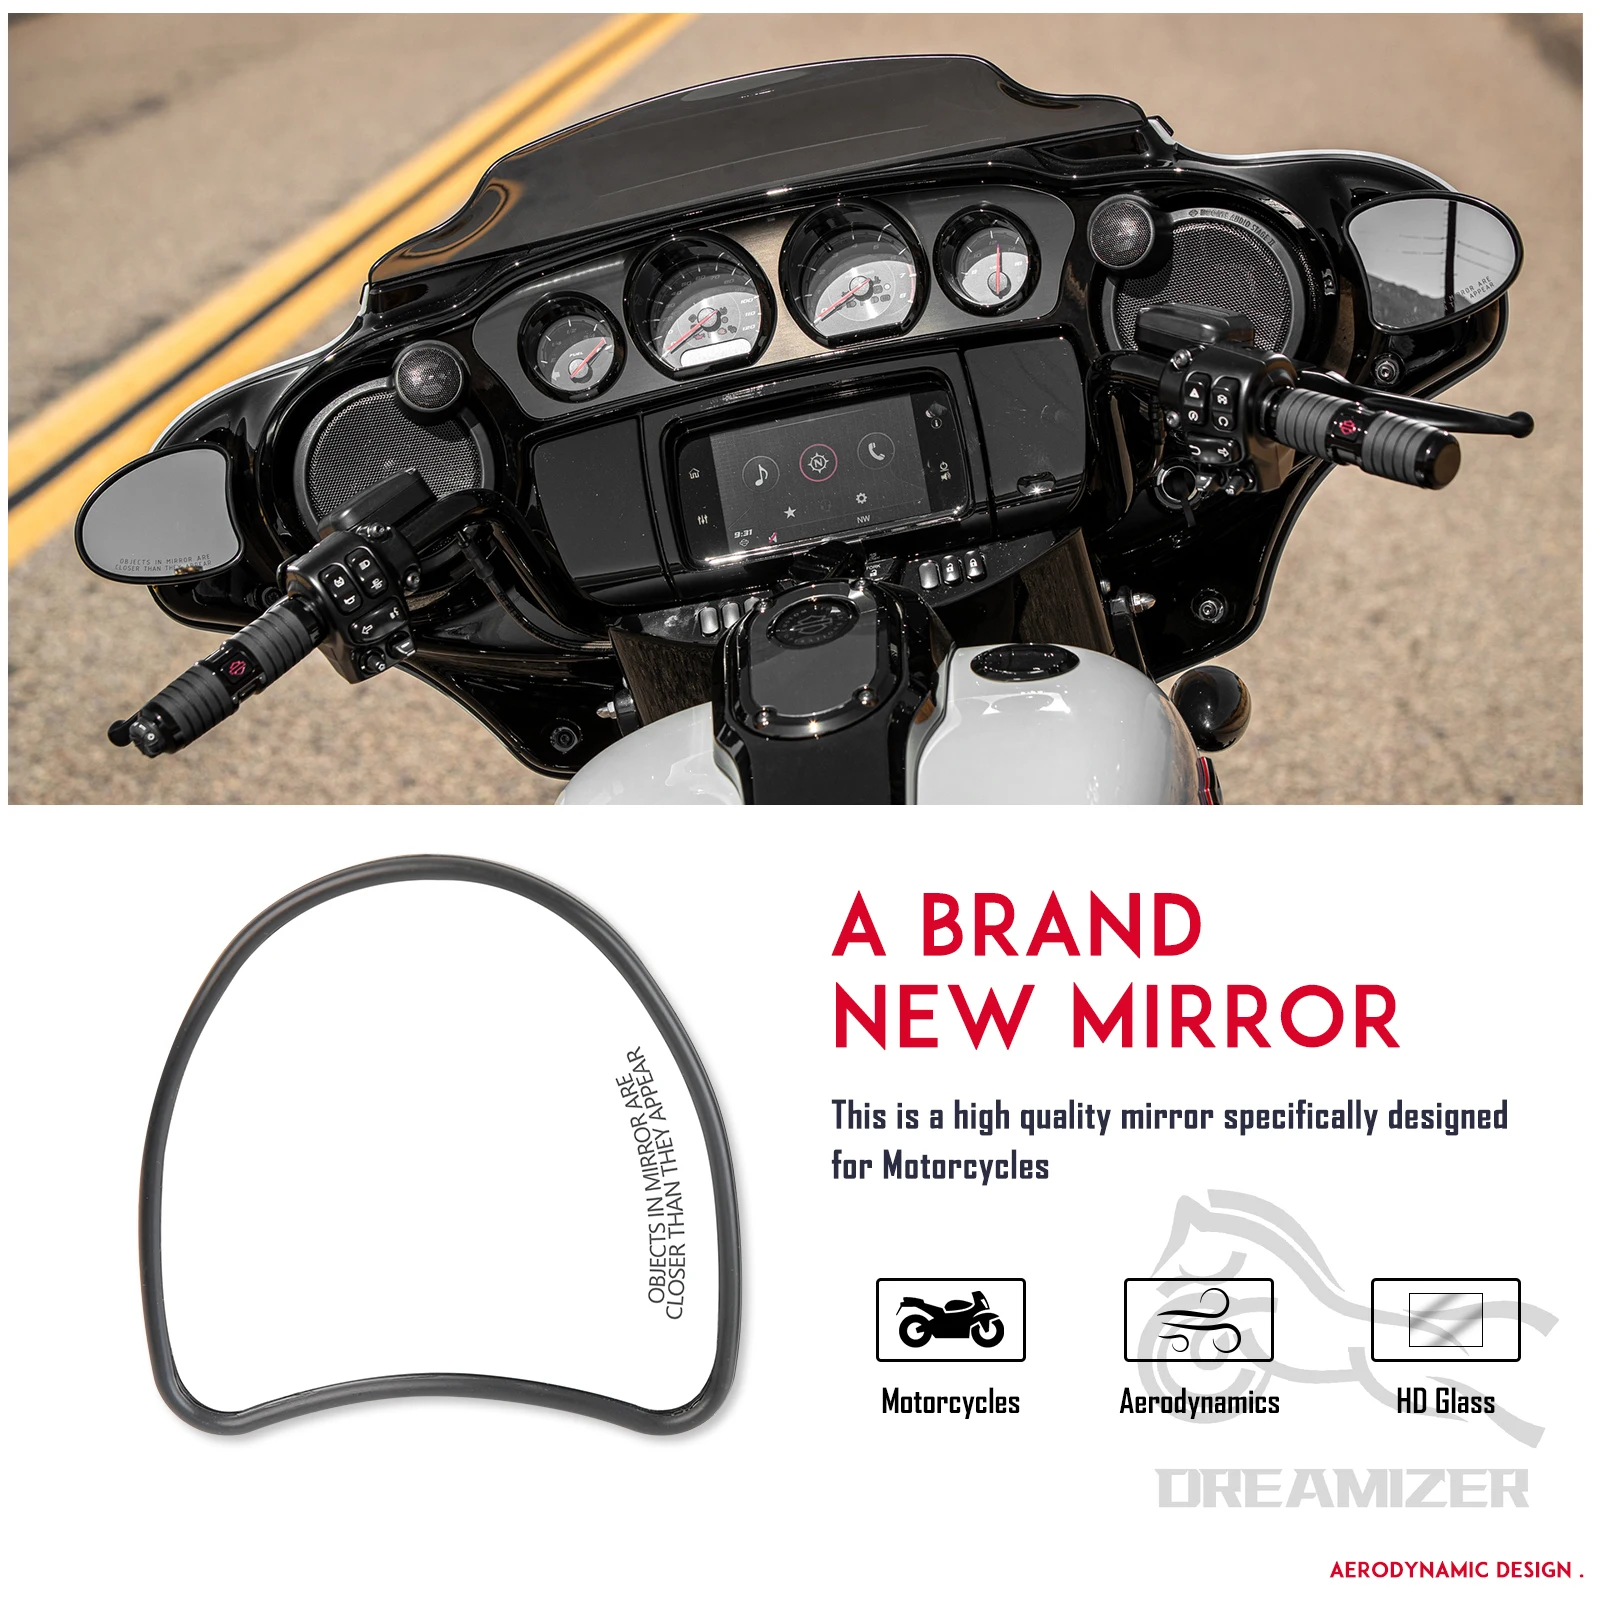 Motocycle Black Rearview Mirror For Harley Electra Street Glide Ultra Limited Tri Glide 2014 Batwing Fairing Mount Side Mirrors street post lights exterior pier light post mount light head with clear glass for garden matte black 2 pack